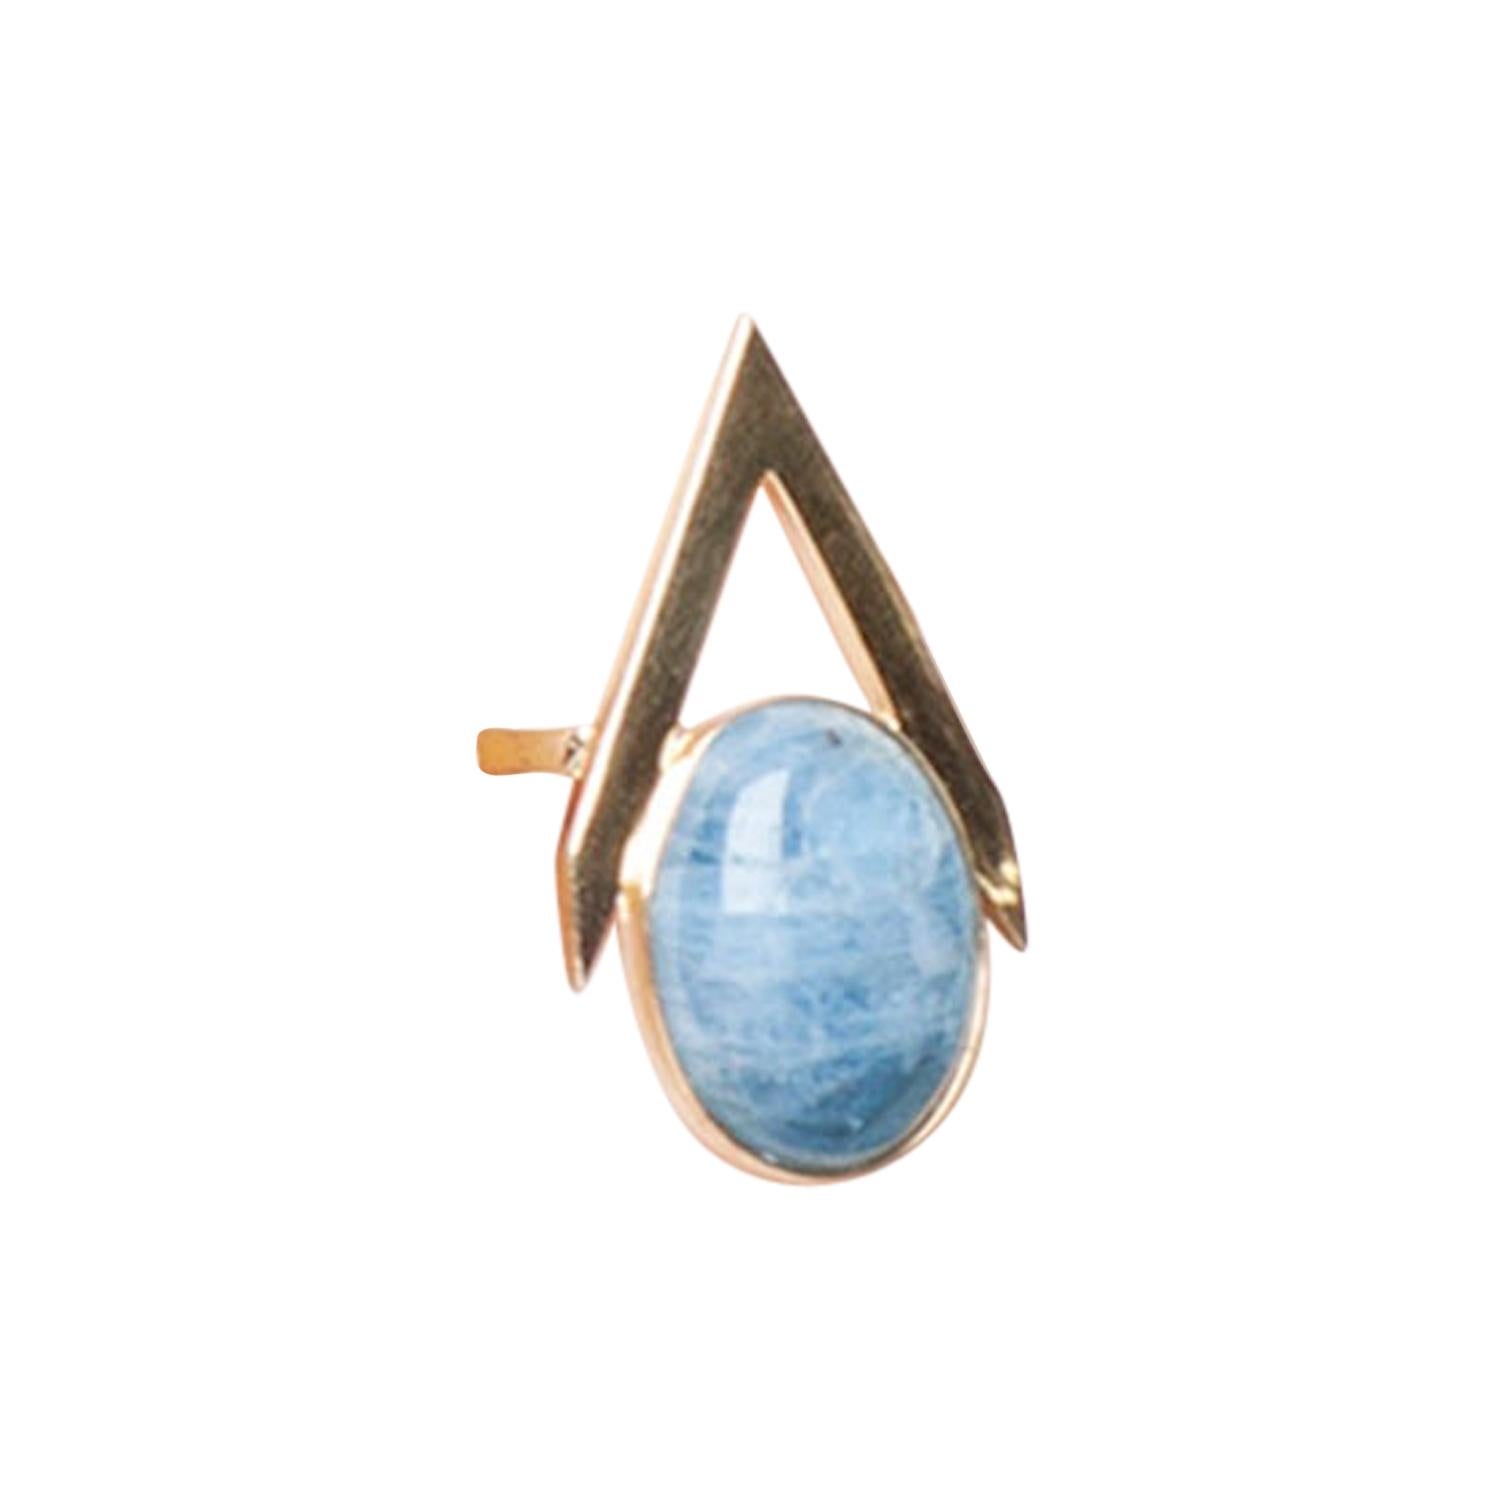 Aquamarine Cabochon Ring in 9 Carat Gold from Iosselliani Fine For Sale